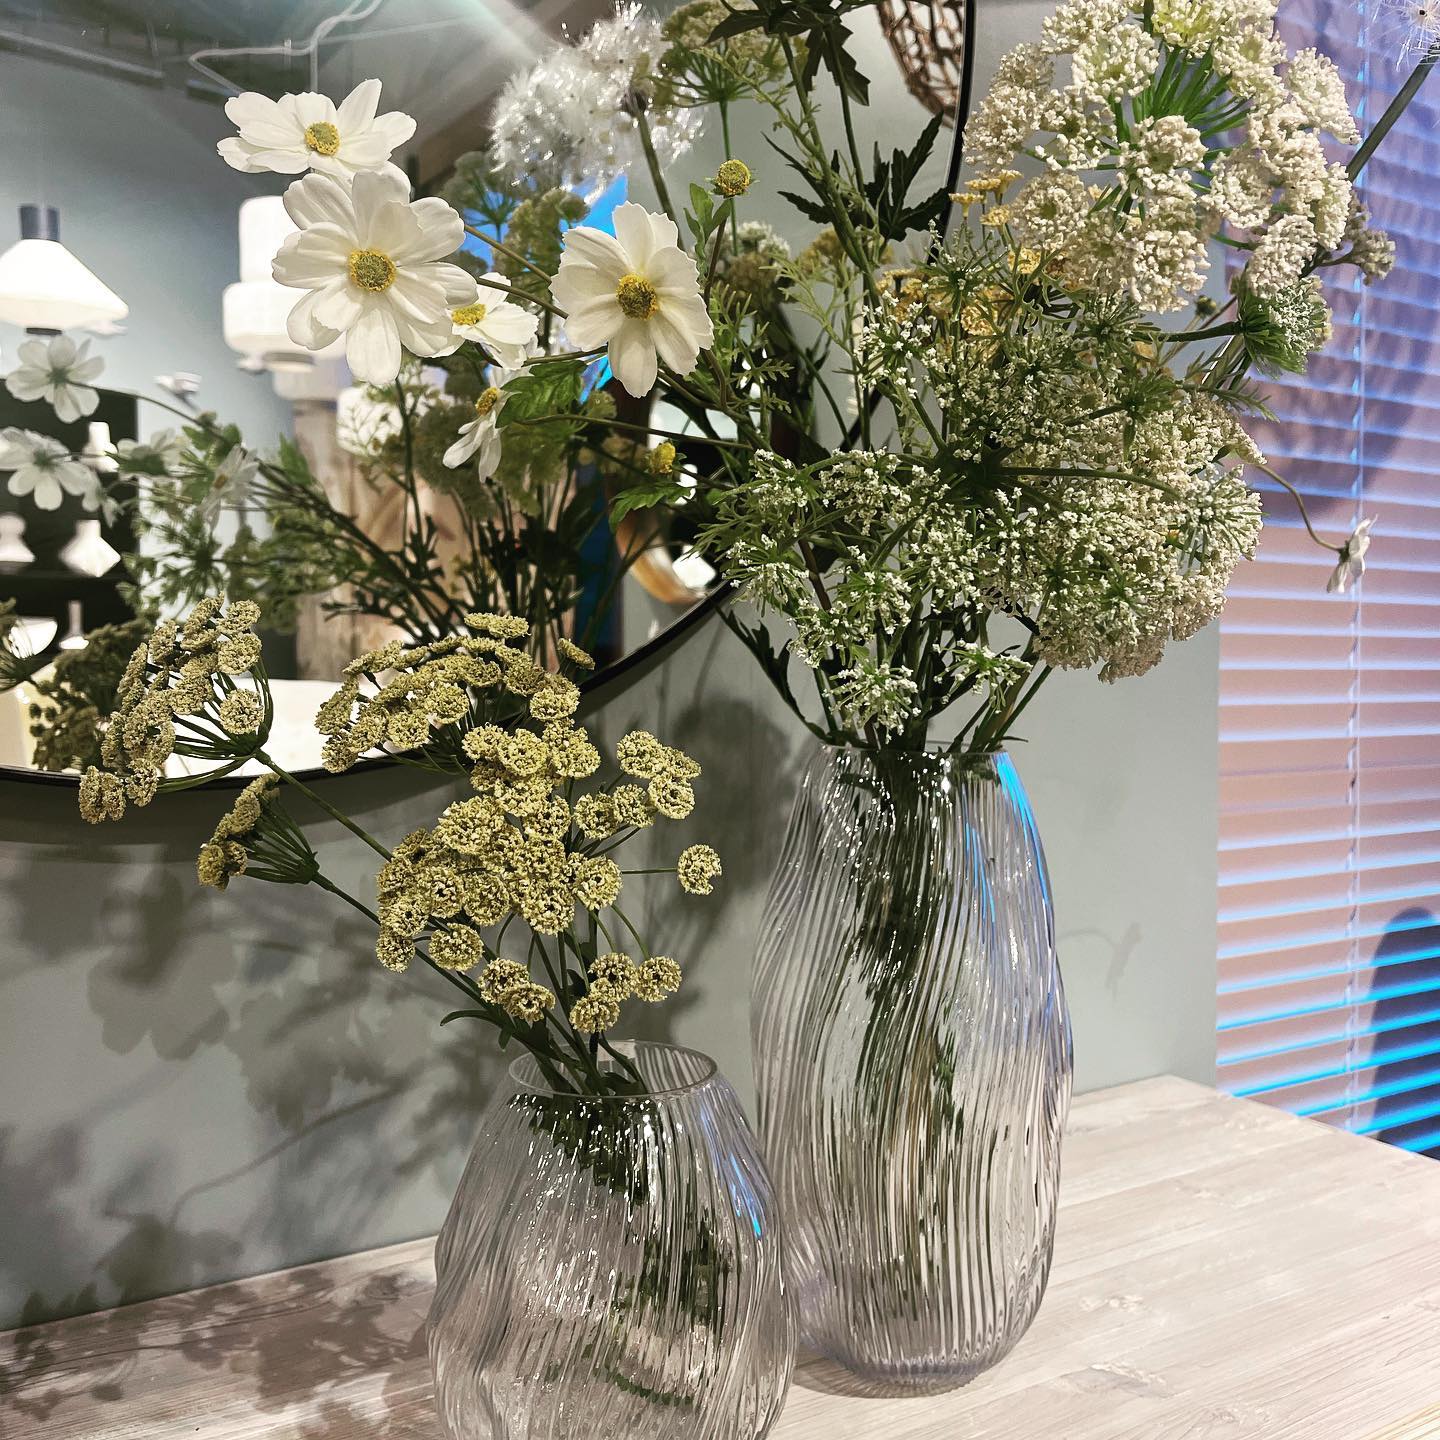 Brighten your winter palette with colourful flowers using our VENUS textured glass vases… in stock now in 2 sizes.
.
.
#glassvases #clearglass #texturedglass #texturedvases #clearvases #vases #vase